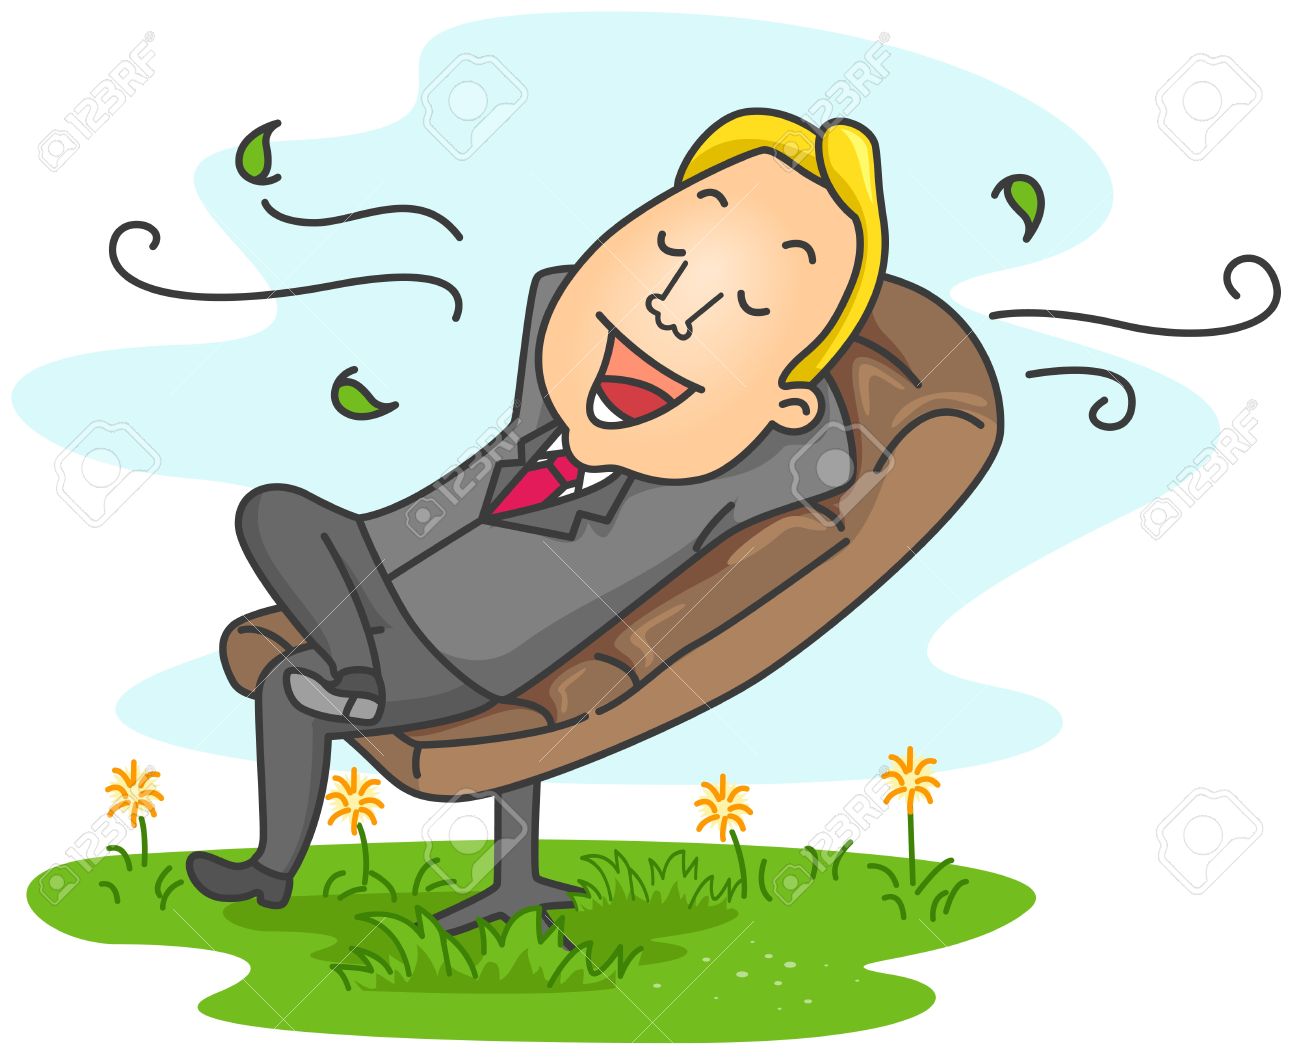 relaxation clipart images - photo #23